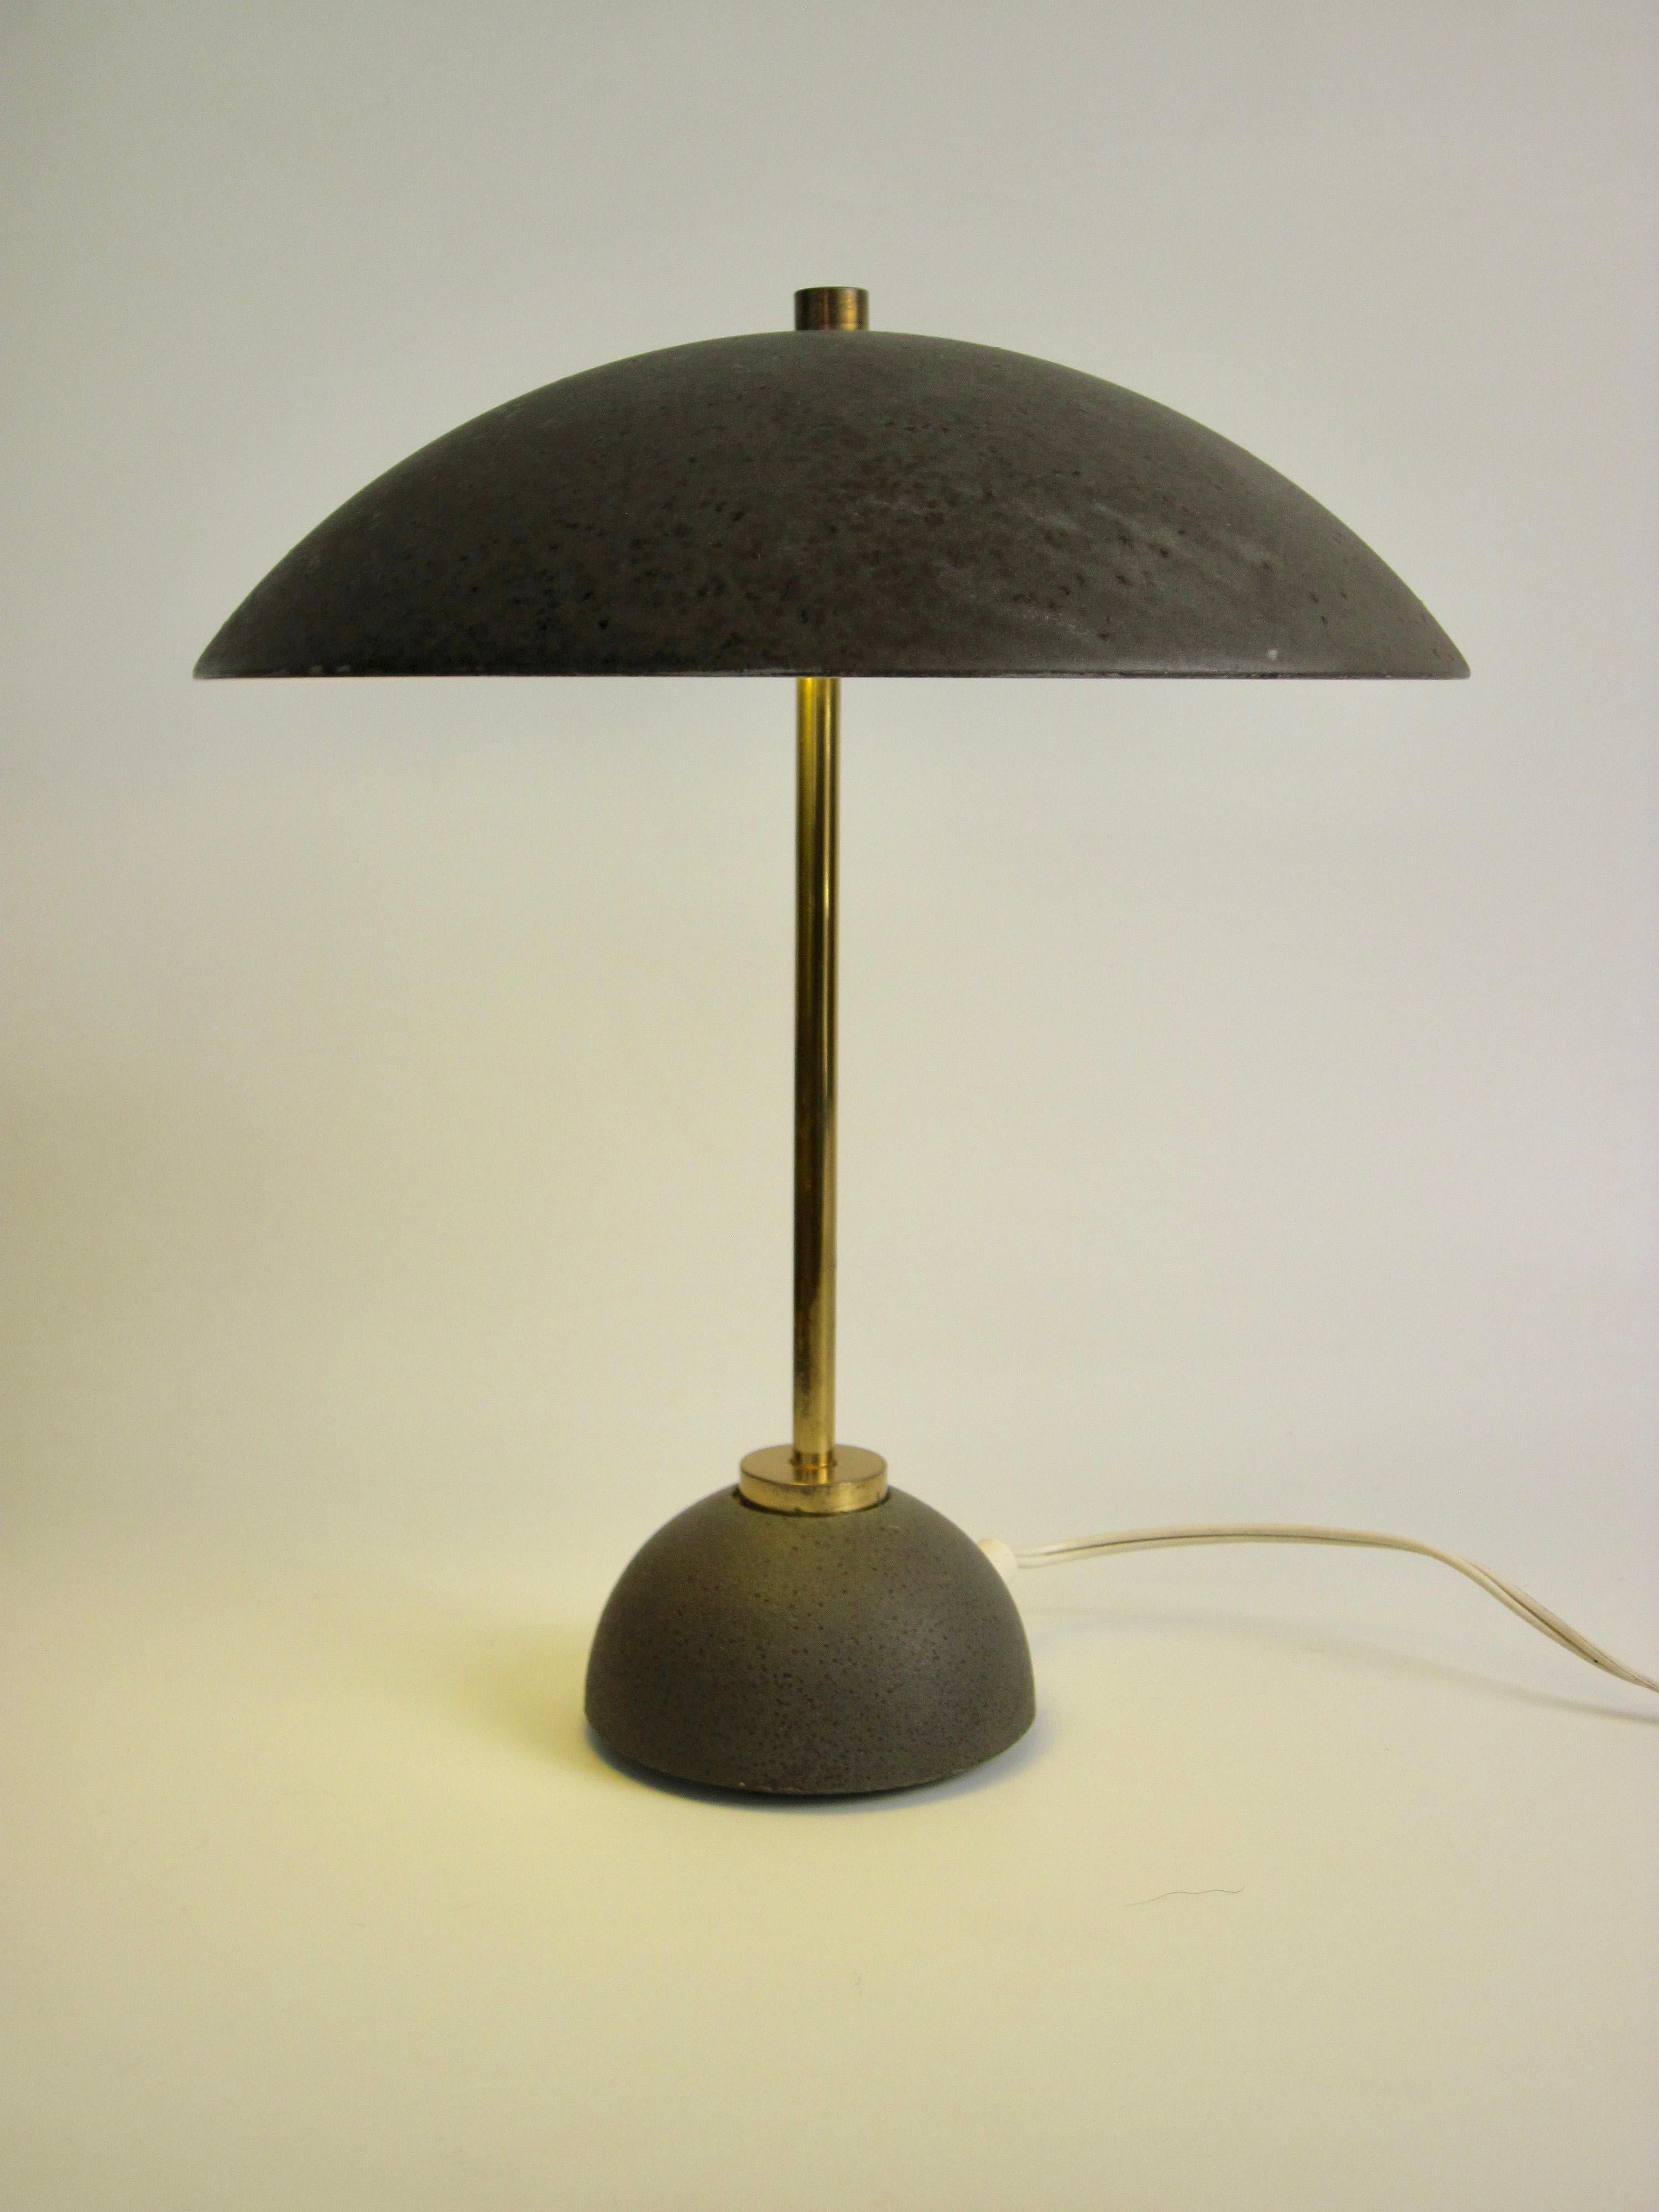 A small dome shaded desk lamp with a weighted base in army green with brass hardware.